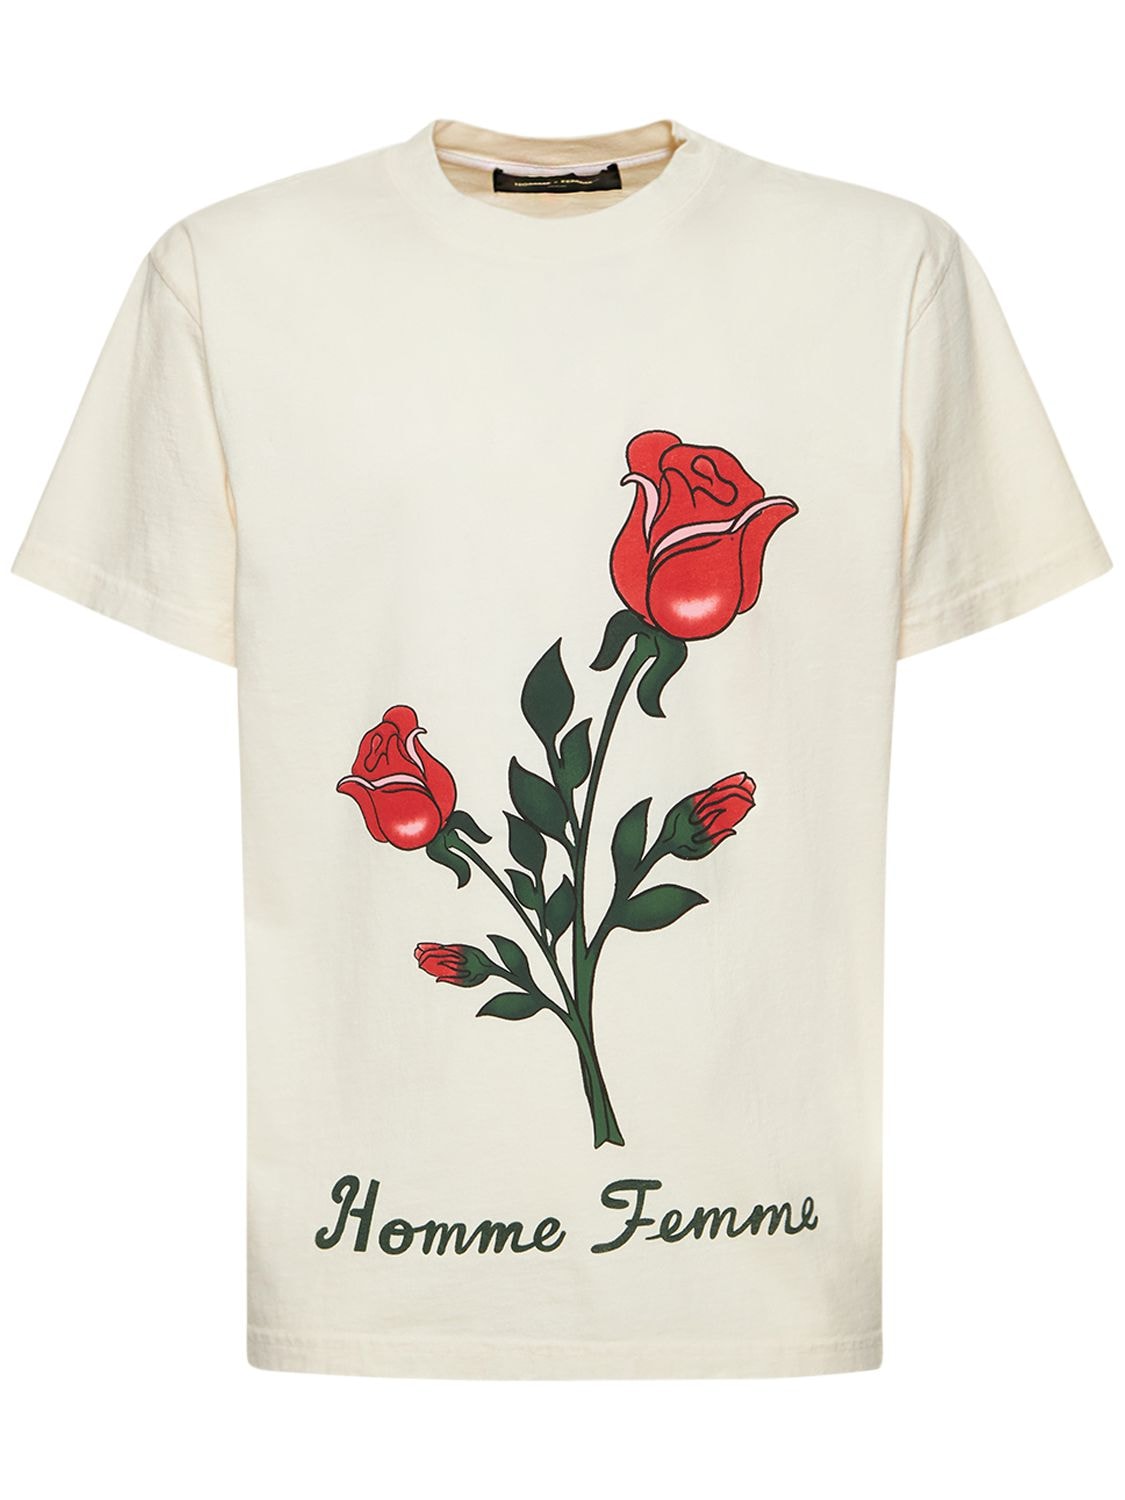 HOMME + FEMME LA Poetry Printed Cotton Jersey T-shirt